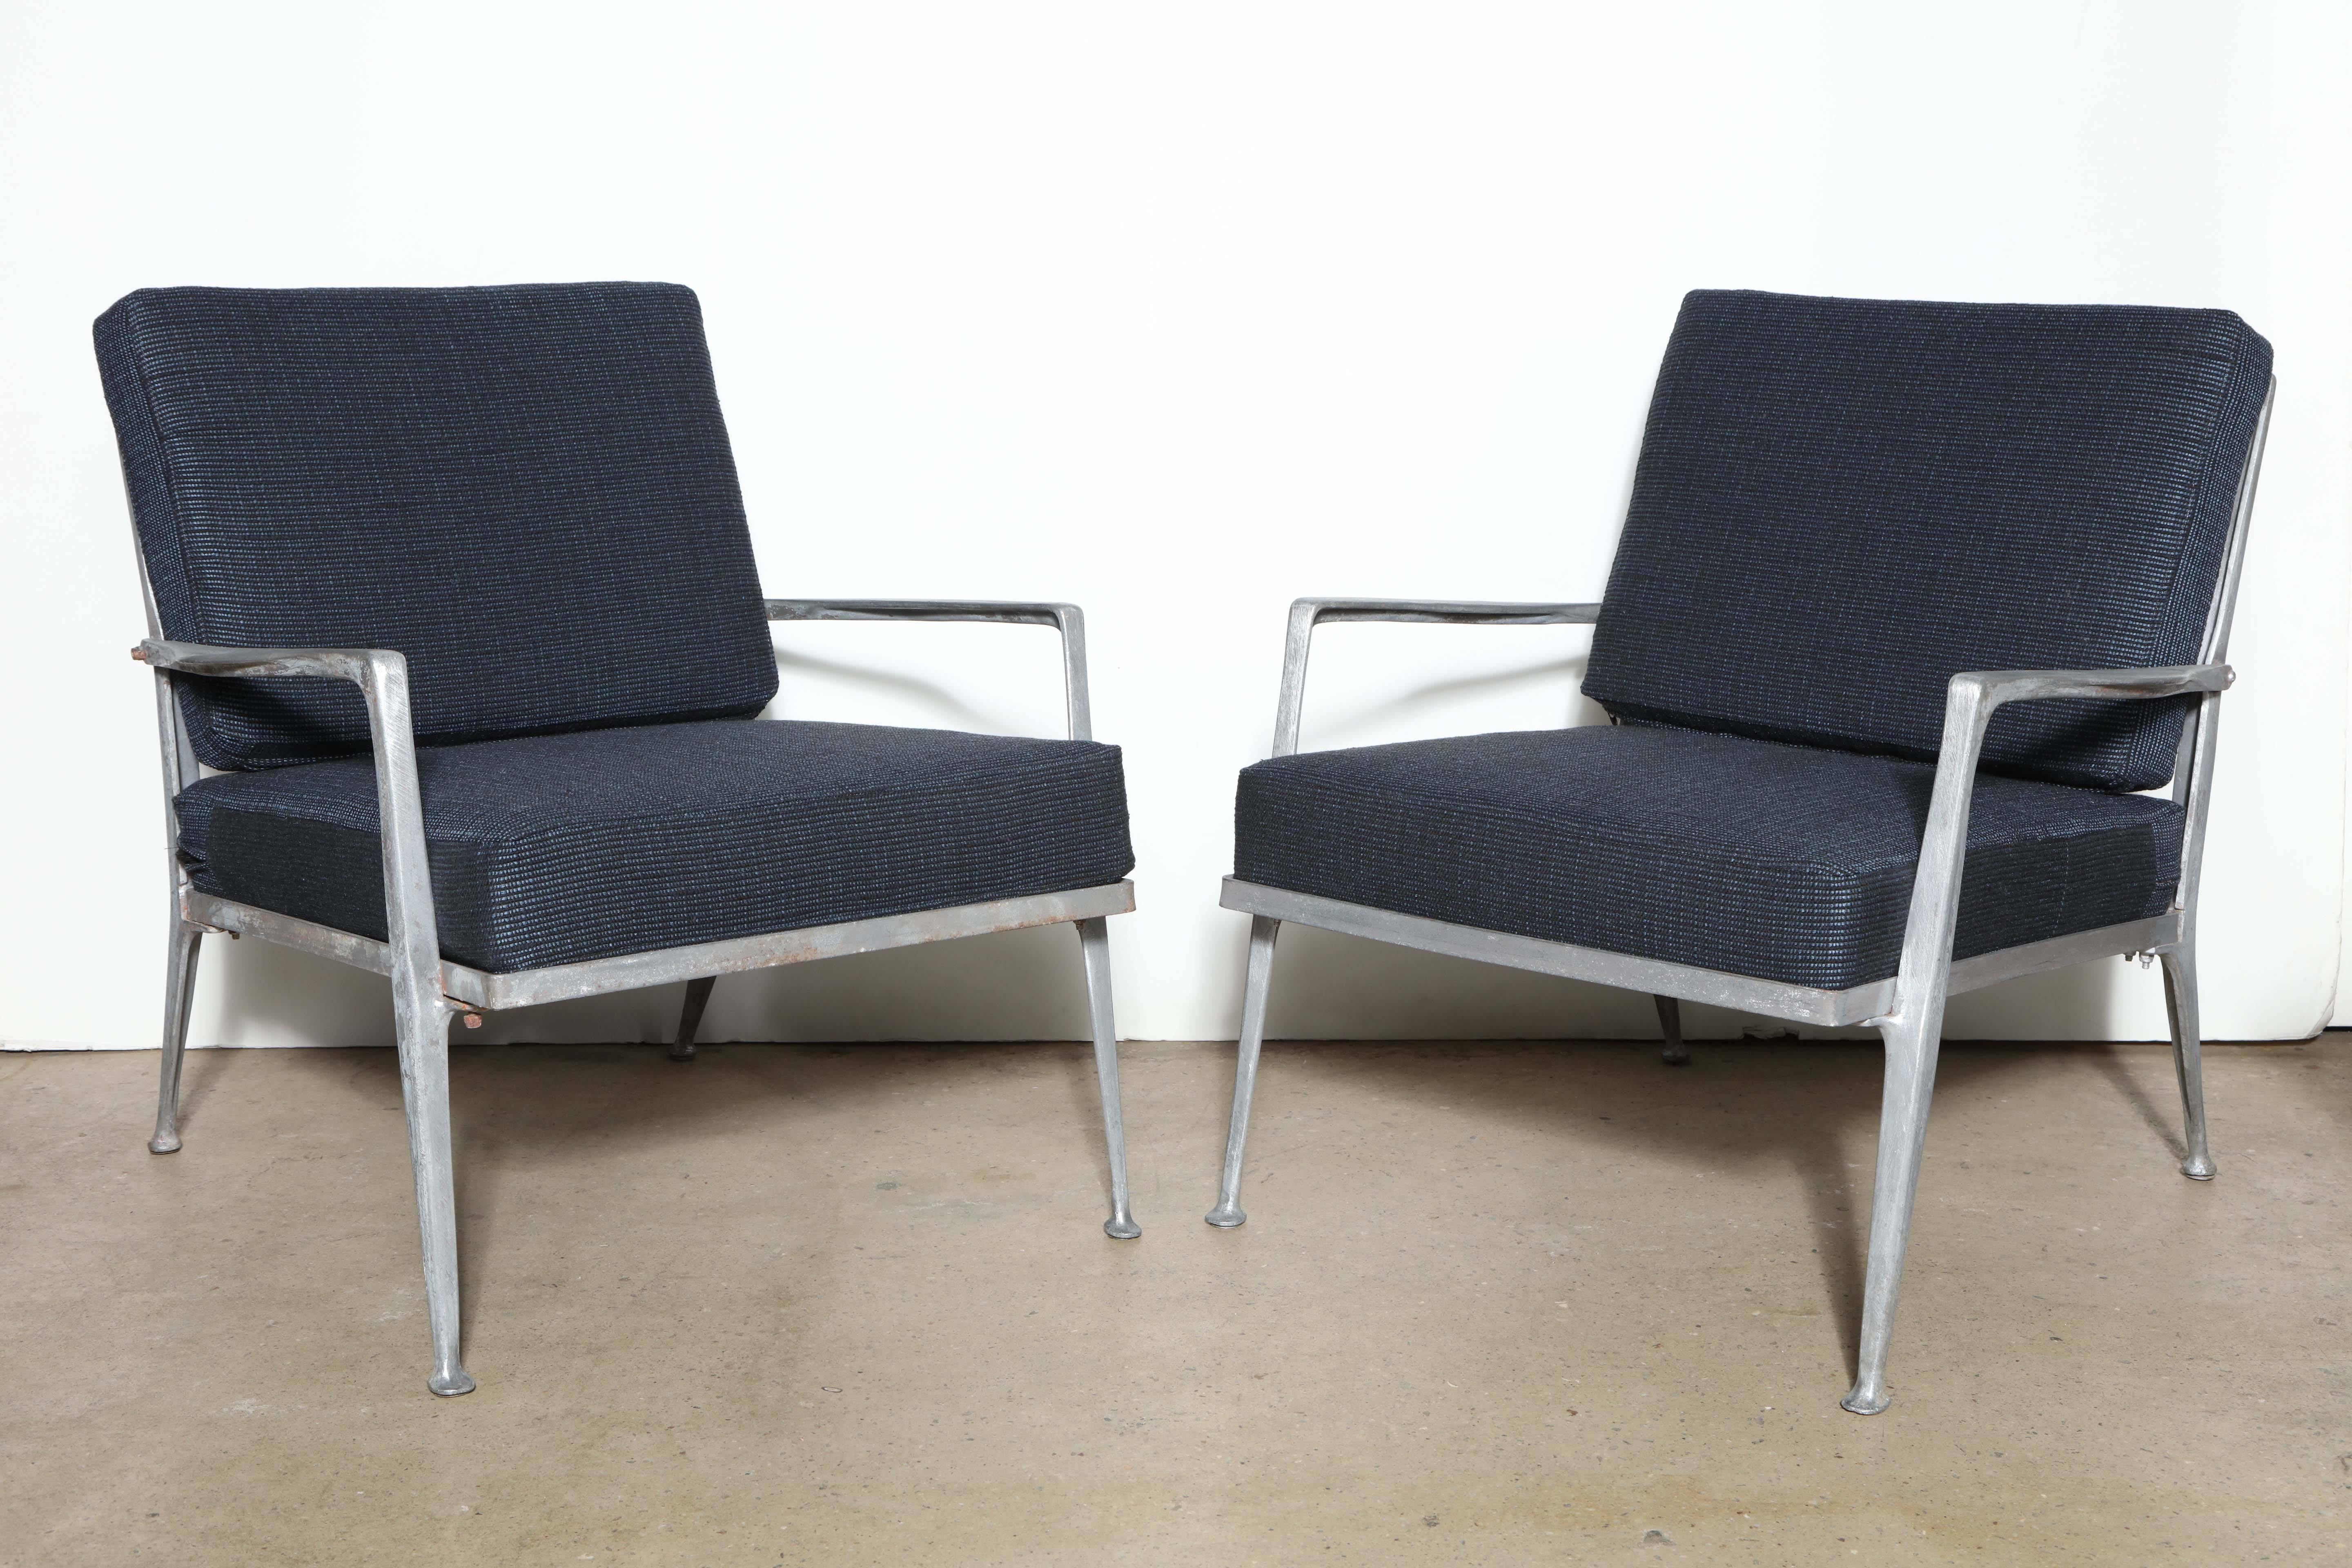 Pair of sculptural American Mid Century Molla Furniture Solid Cast Aluminum Lounge Chairs.  Featuring a solid Cast Aluminum framework, cross frame rear construction and four lightweight cushions, newly upholstered in a Dark Blue and Black woven